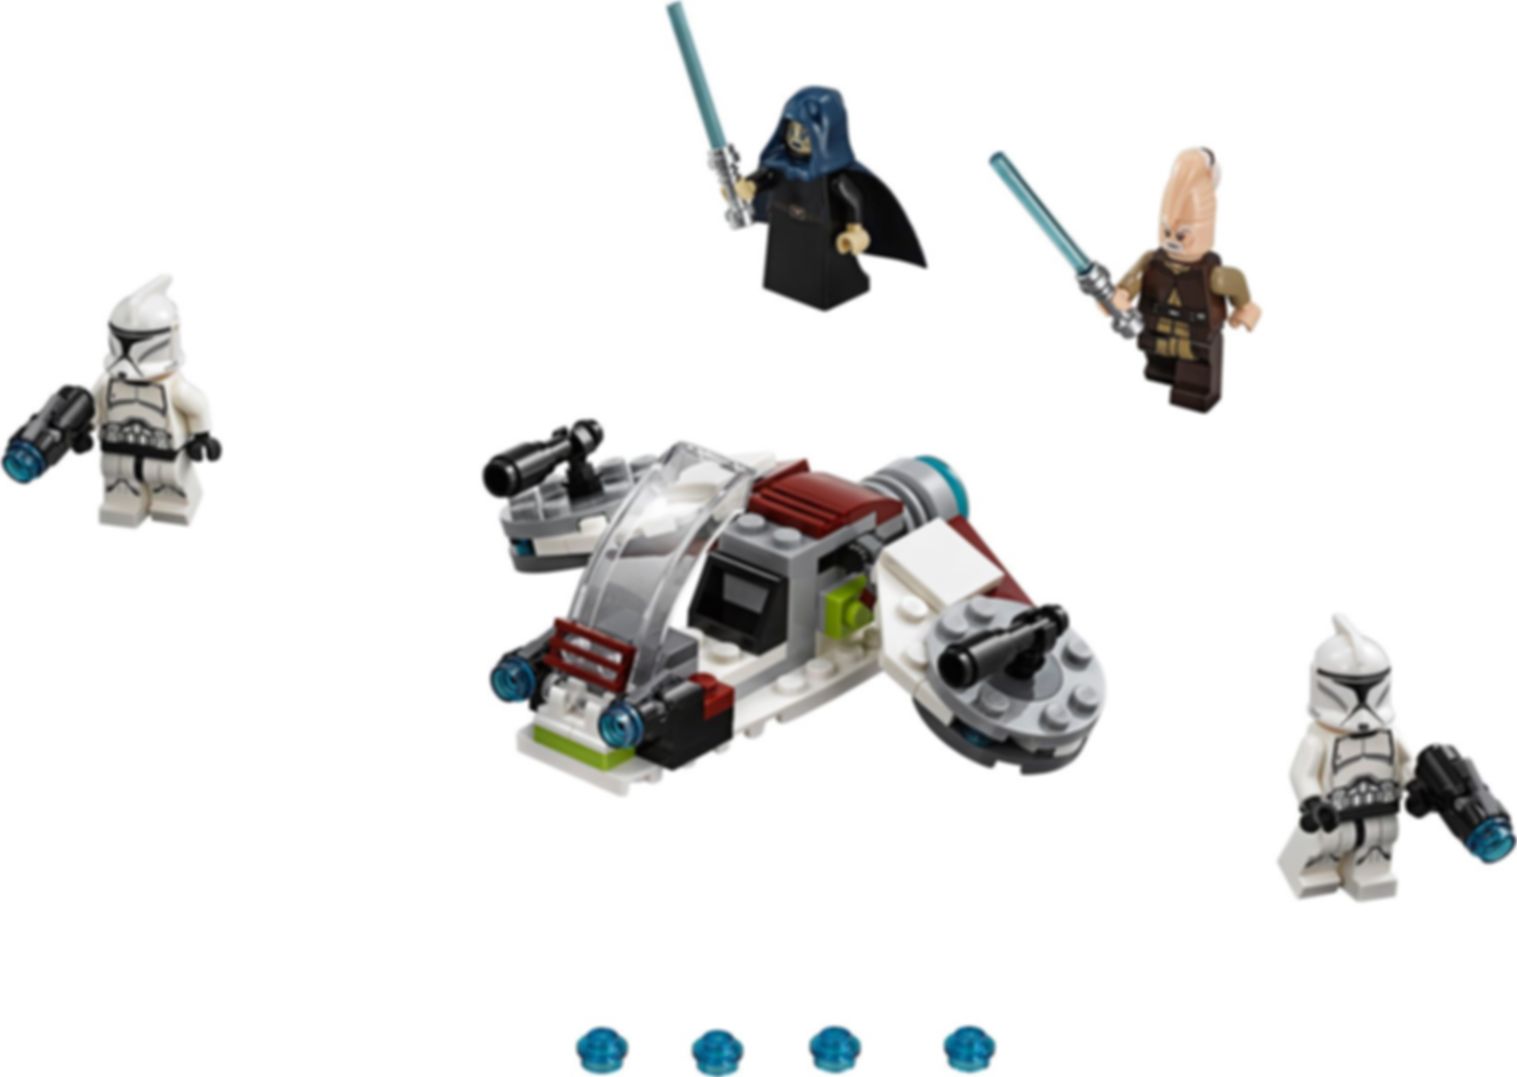 LEGO® Star Wars Jedi™ and Clone Troopers™ Battle Pack components